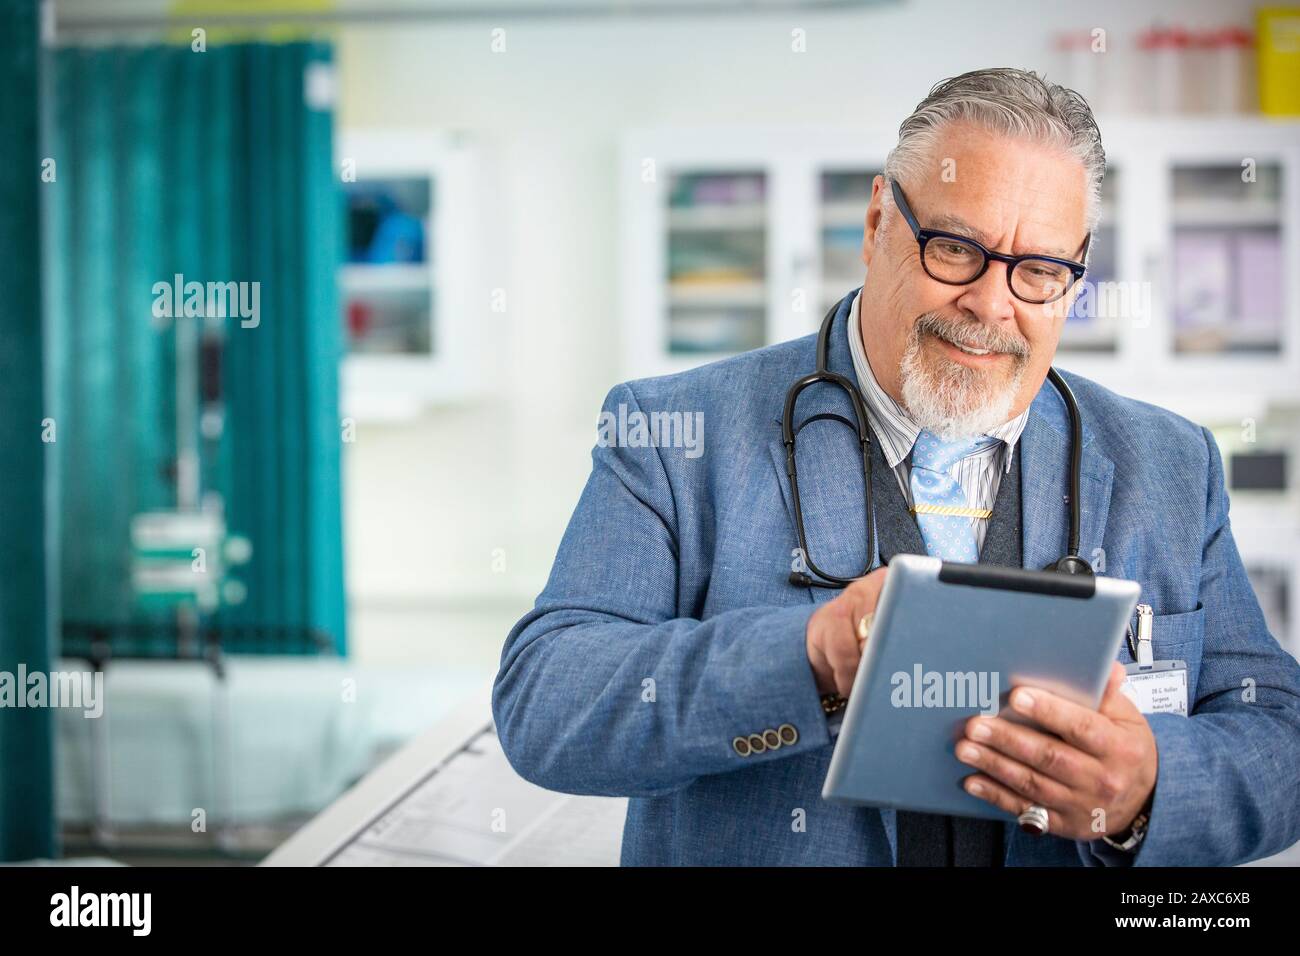 Doctor using digital tablet in clinic Banque D'Images